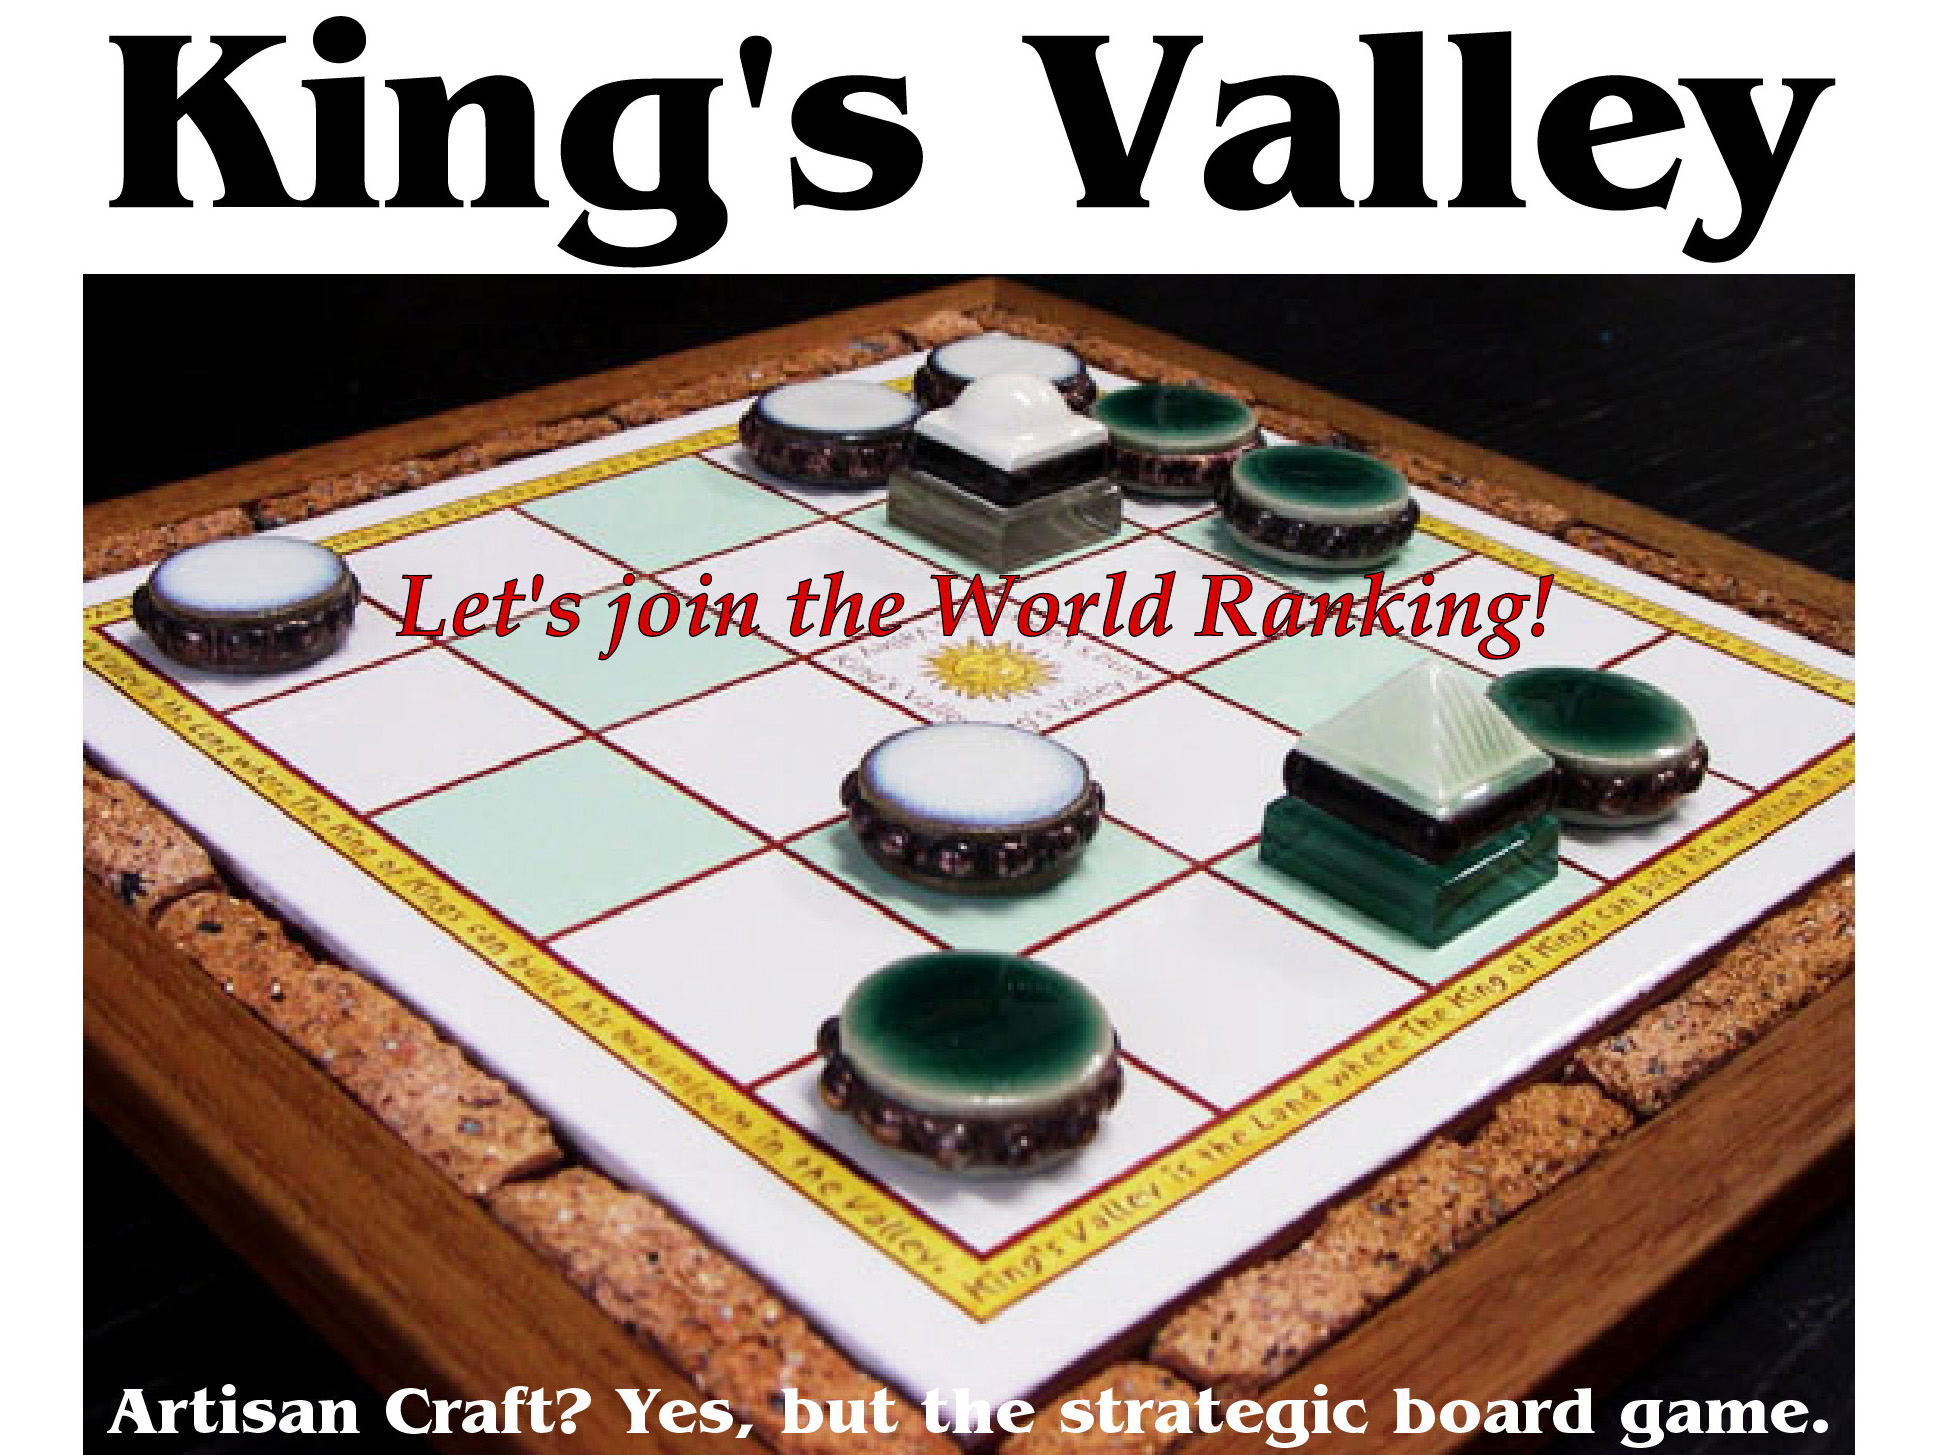 KIng's Valley game